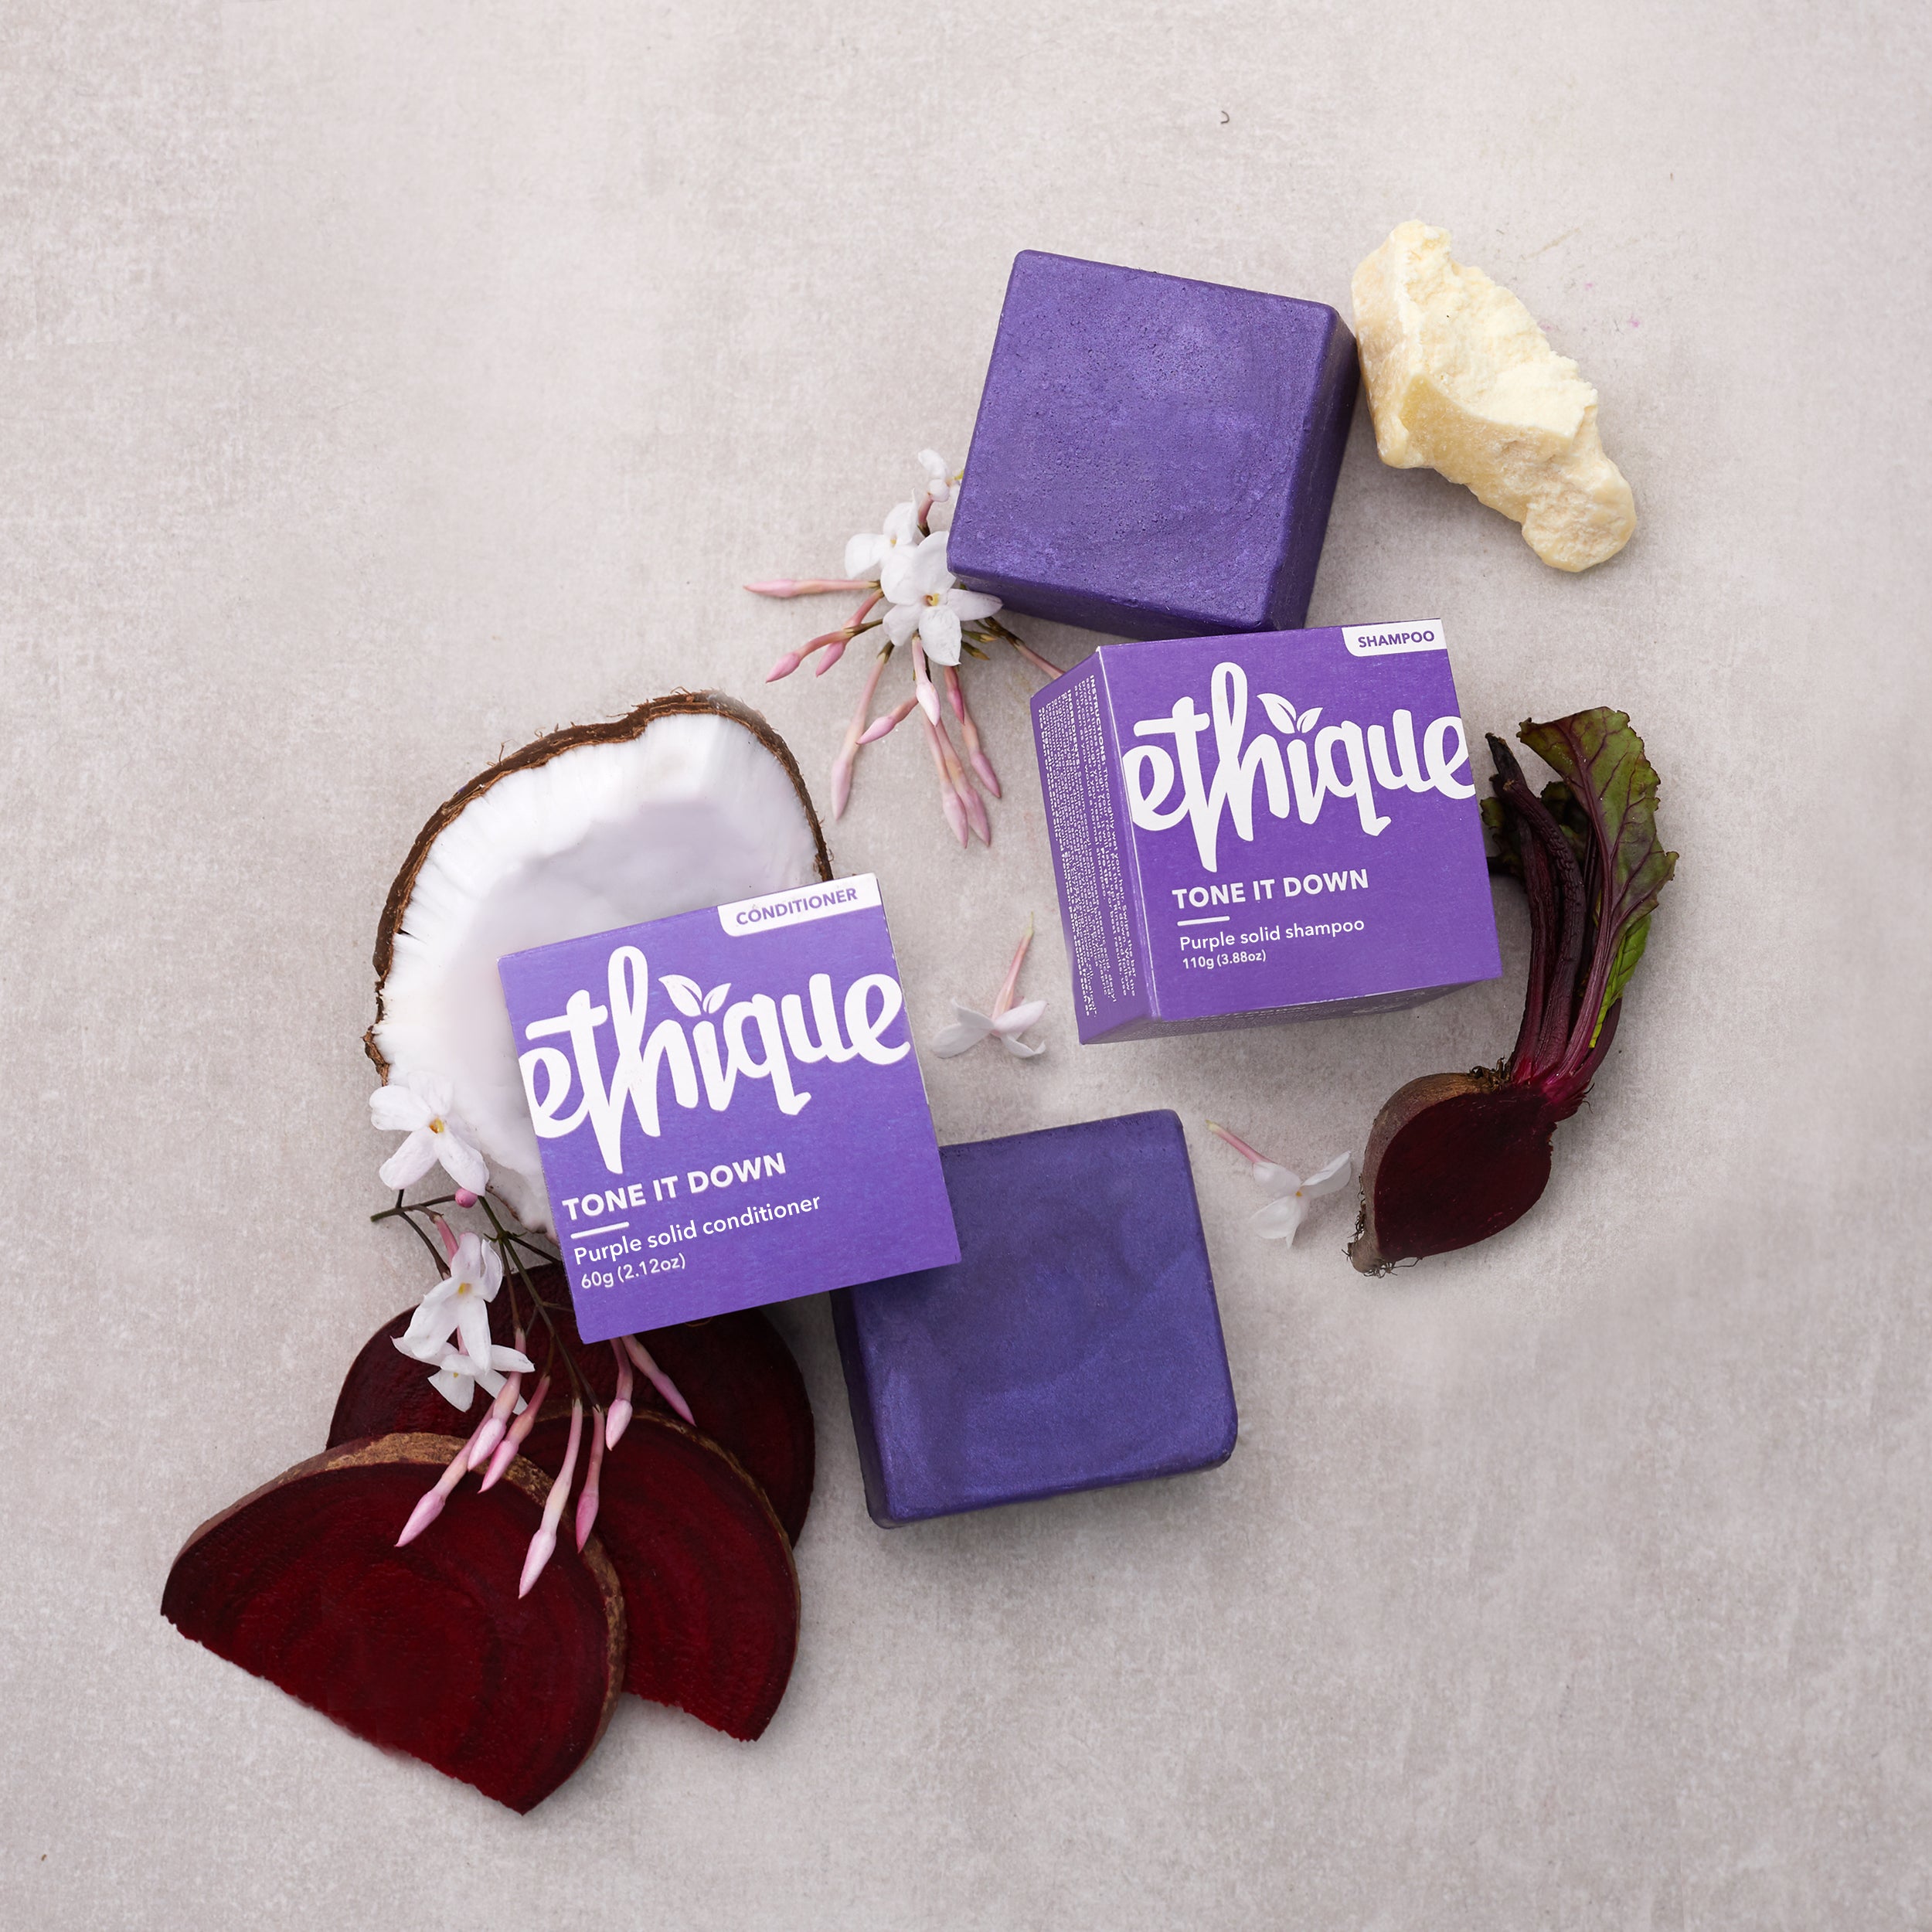 Tone it Down - Ethique Purple Shampoo &amp; Conditioner - Neat Natural Products NZ